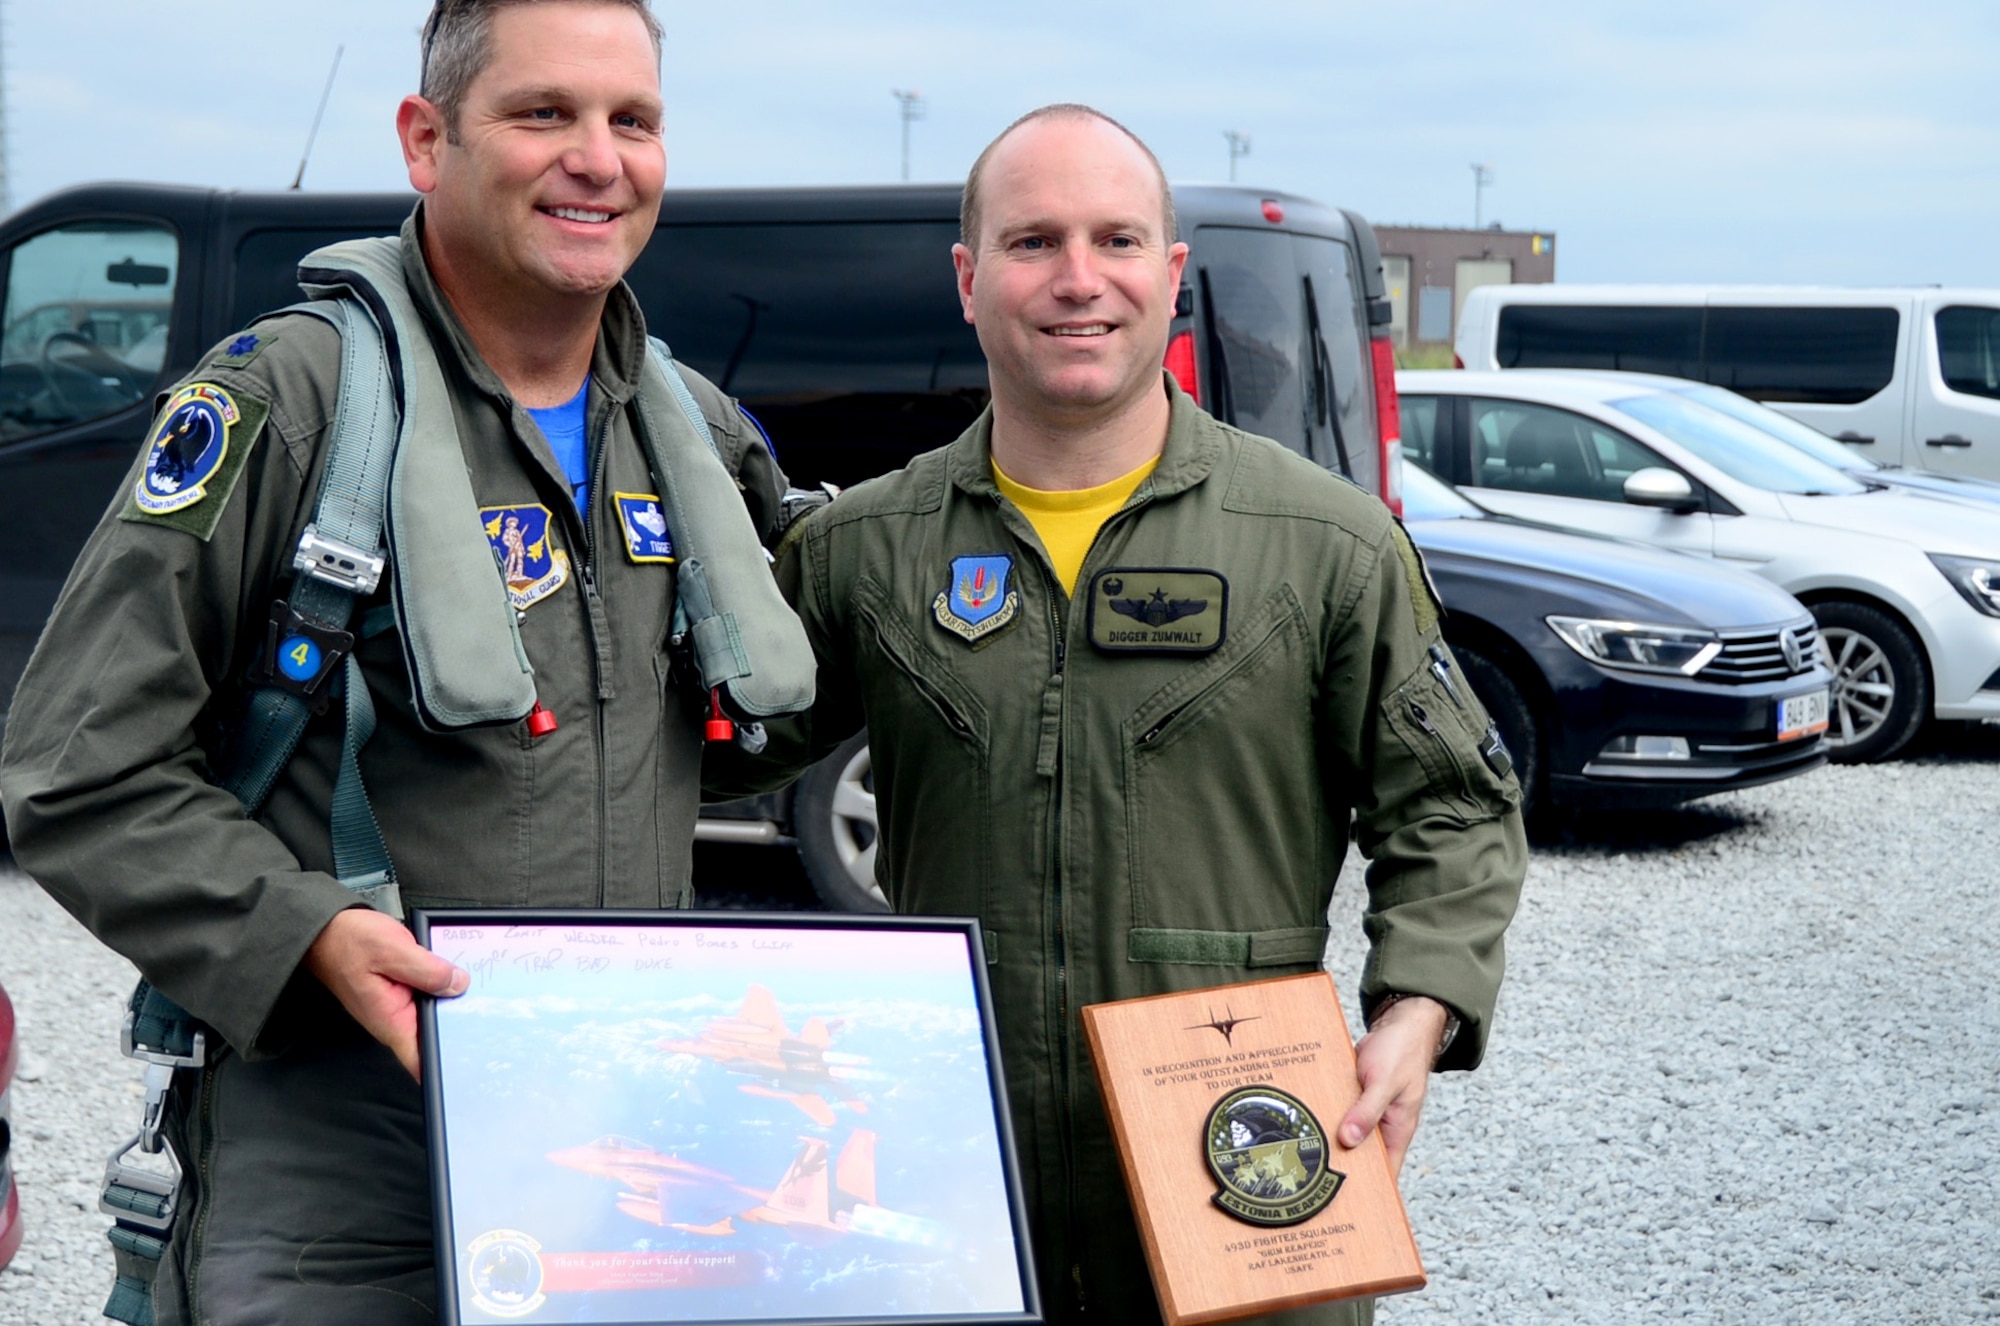 U.S. Air Force Lt. Col. Robert Swertfager, 194th Expeditionary Fighter Squadron commander, left, stands with U.S. Air Force Lt. Col. Jason Zumwalt, 493rd Fighter Squadron commander, at Ämari Air Base, Estonia, Aug. 26, 2016. The 194th and 493rd participated in a multilateral flying training deployment to build interoperability through air assurance training with allies and partners. The 194th EFS is assigned to the California Air National Guard in Fresno, and the 493rd FS is assigned to Royal Air Force Lakenheath, England. (U.S. Air Force photo by Senior Airman Erin Trower/Released)